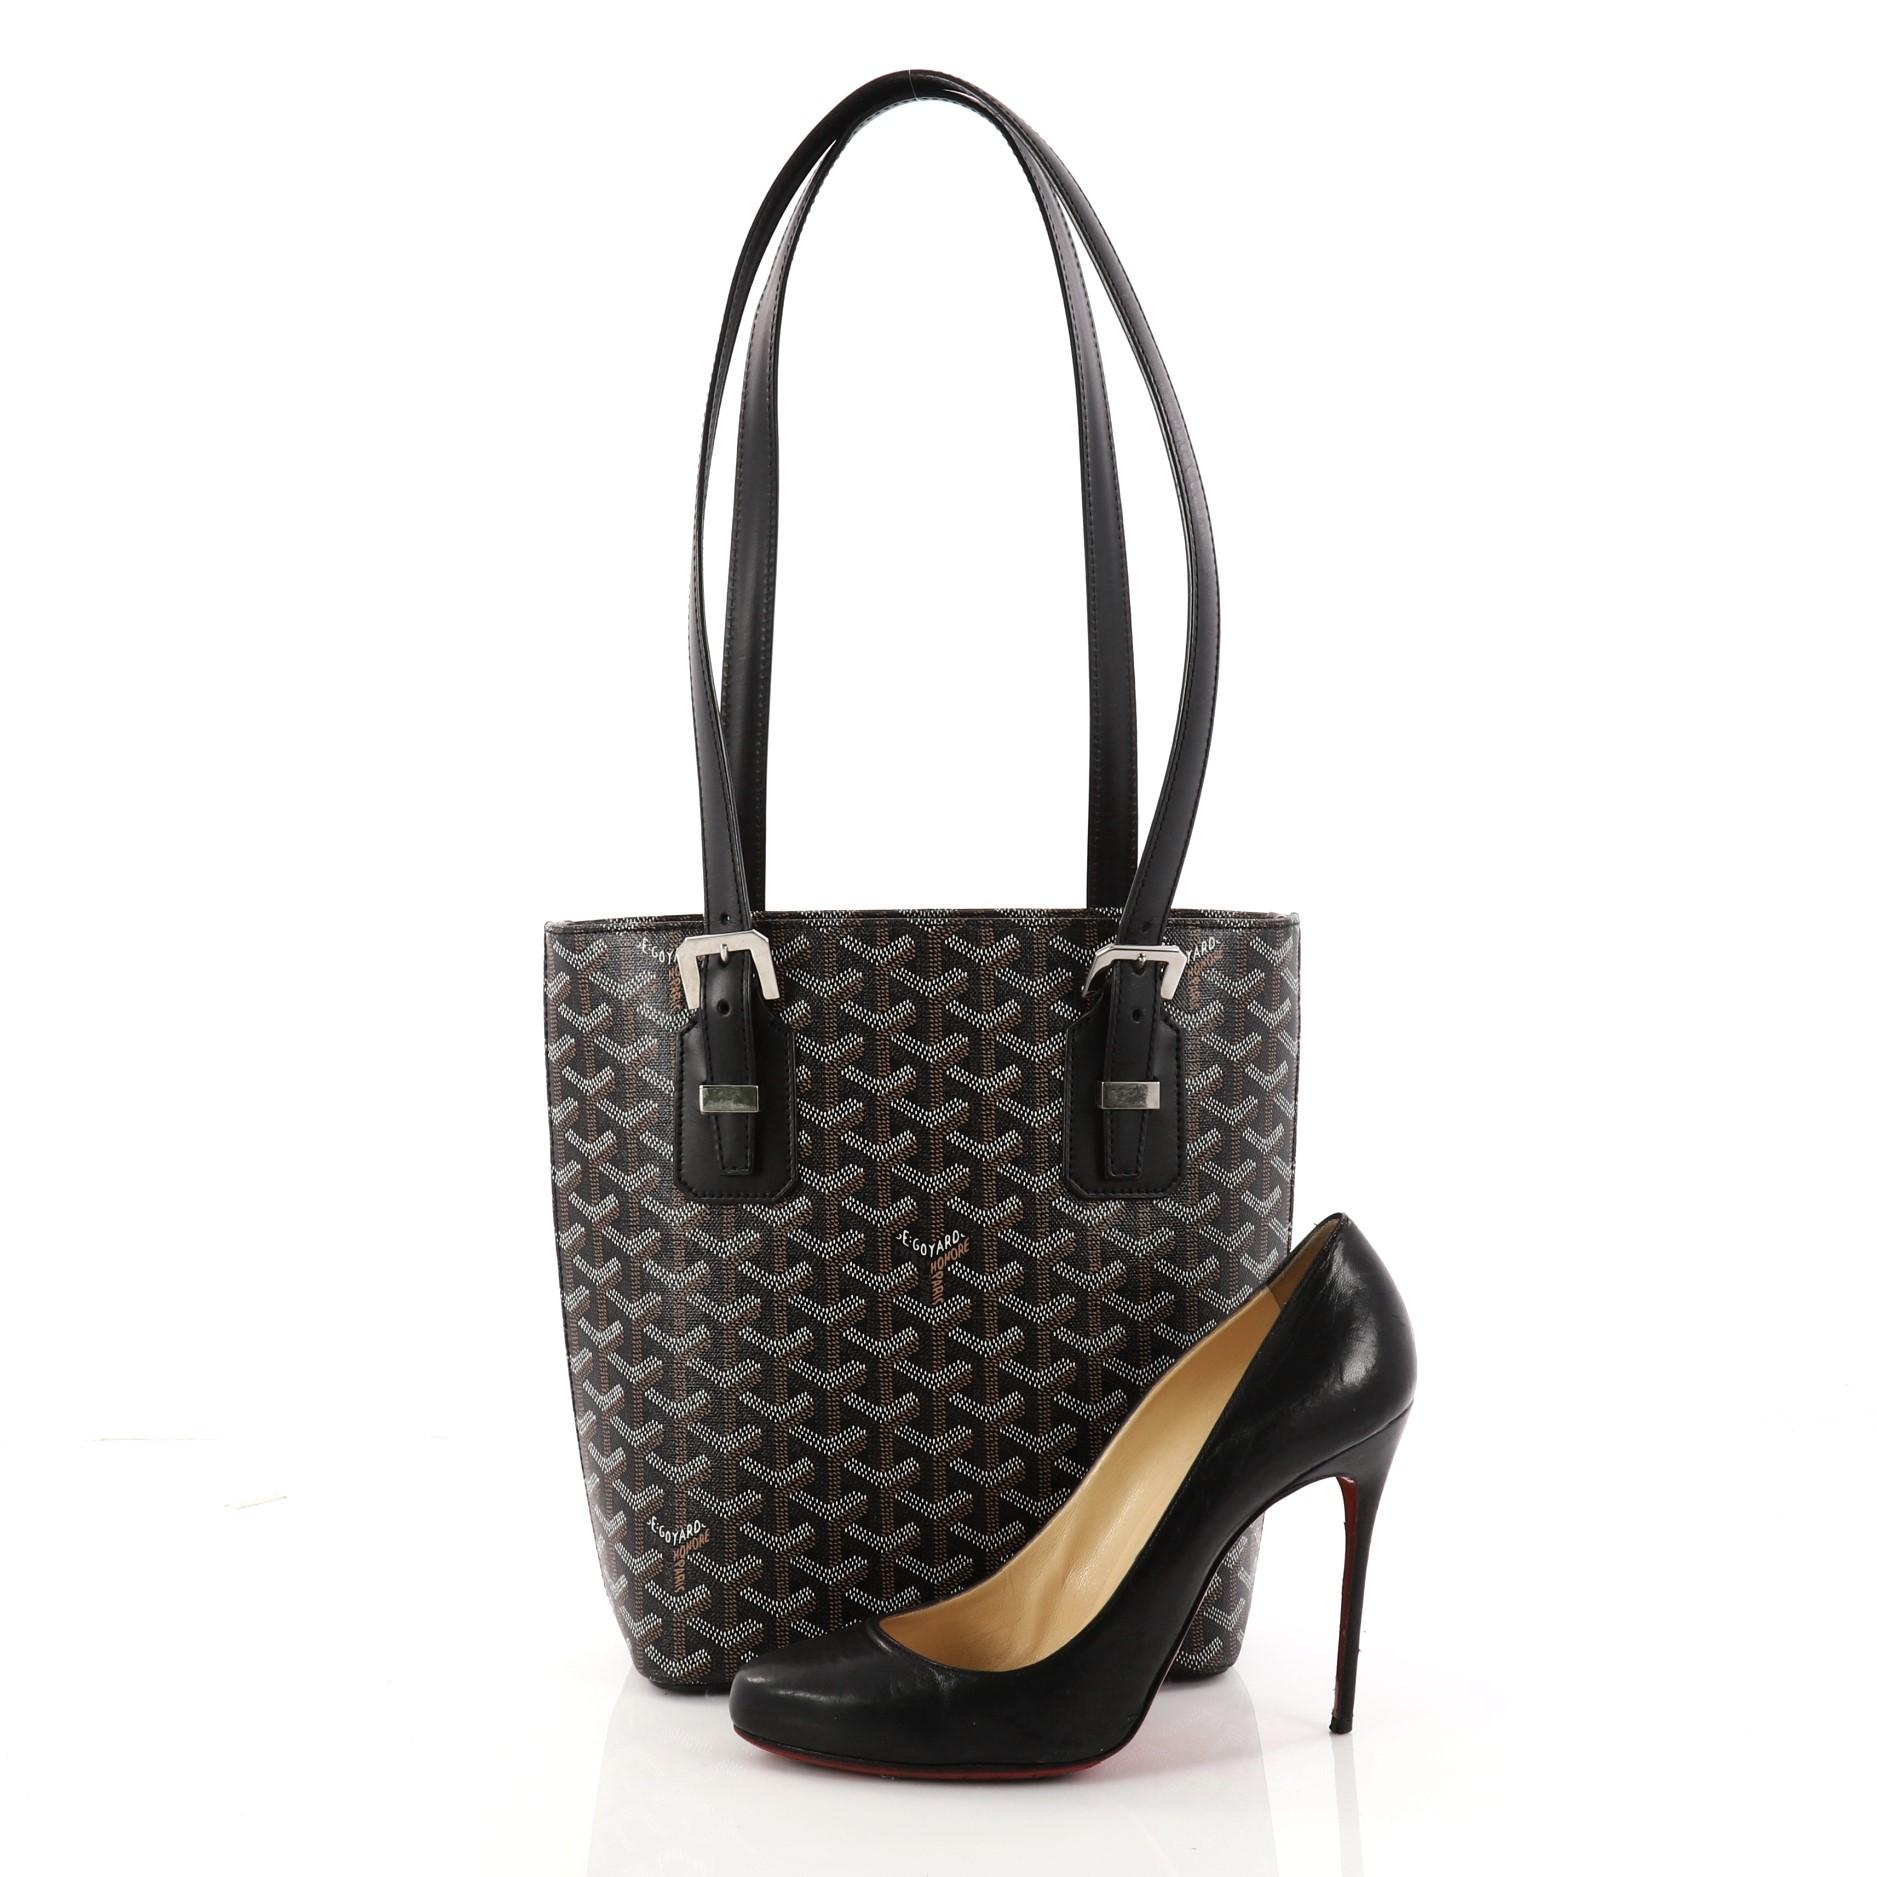 This authentic Goyard Marie Galante Handbag Coated Canvas PM exhibit a timeless elegance perfect for the stylish fashionista. Crafted from black coated canvas, this classic and contemporary bag features dual flat leather shoulder straps with buckle